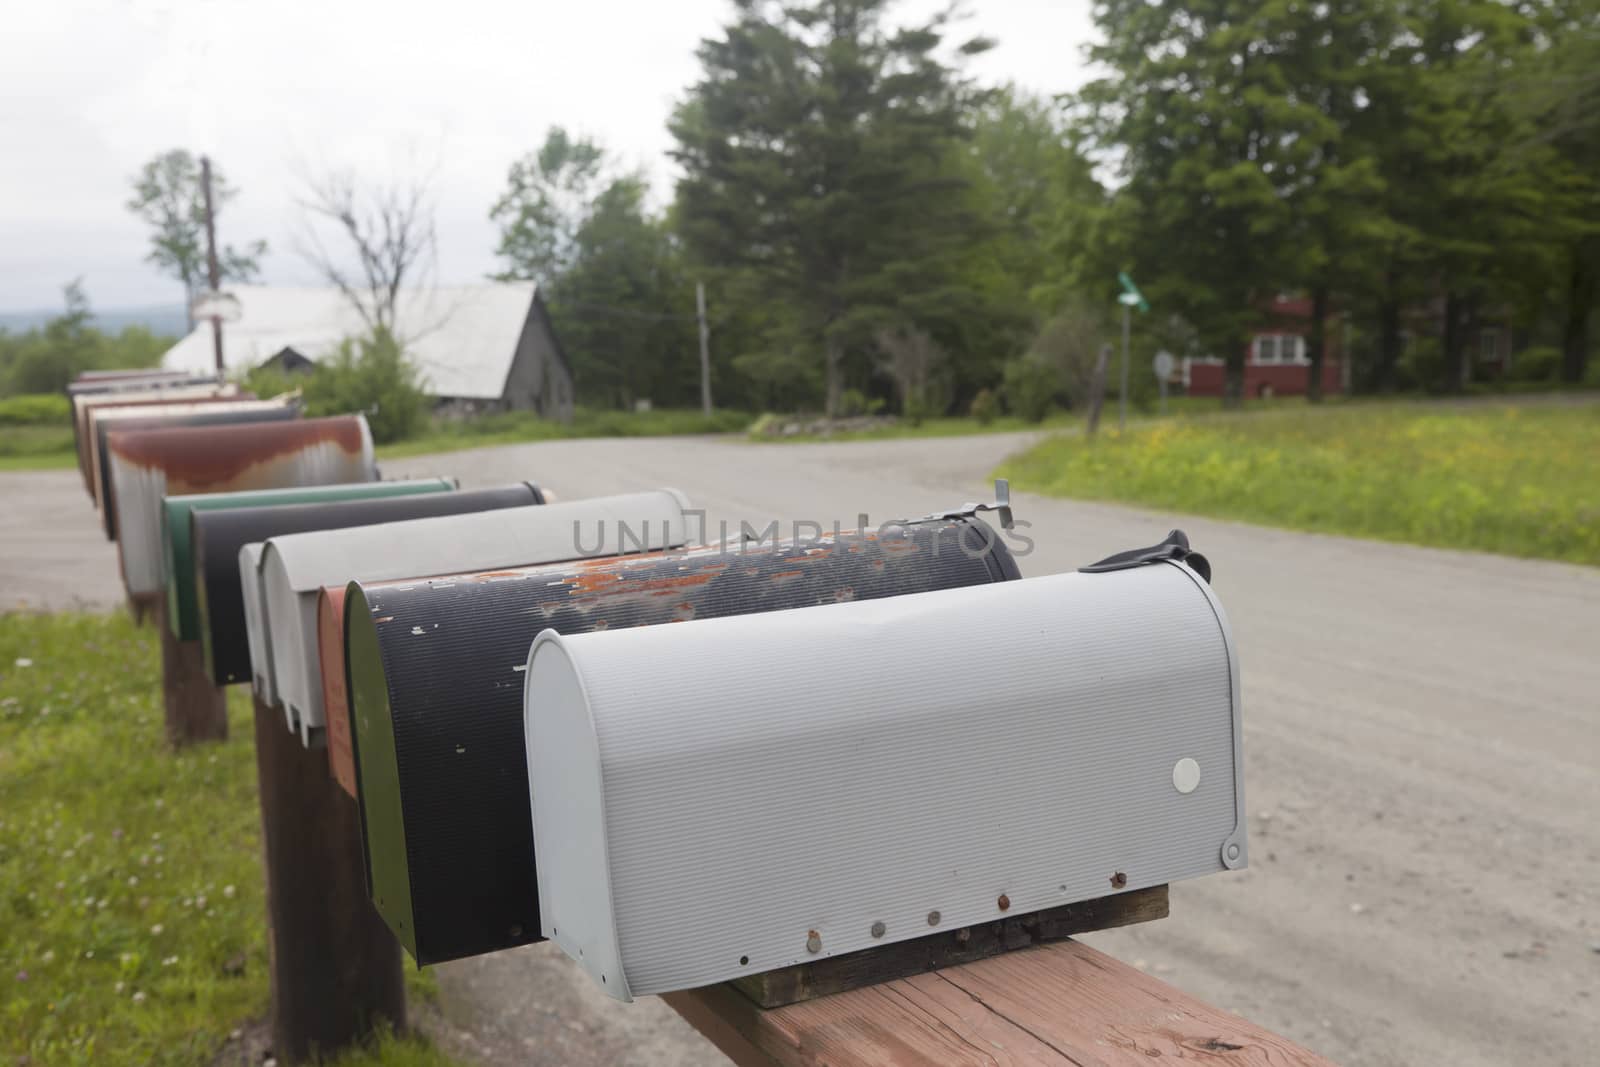 Rural mailboxes on a dirt road in the country.